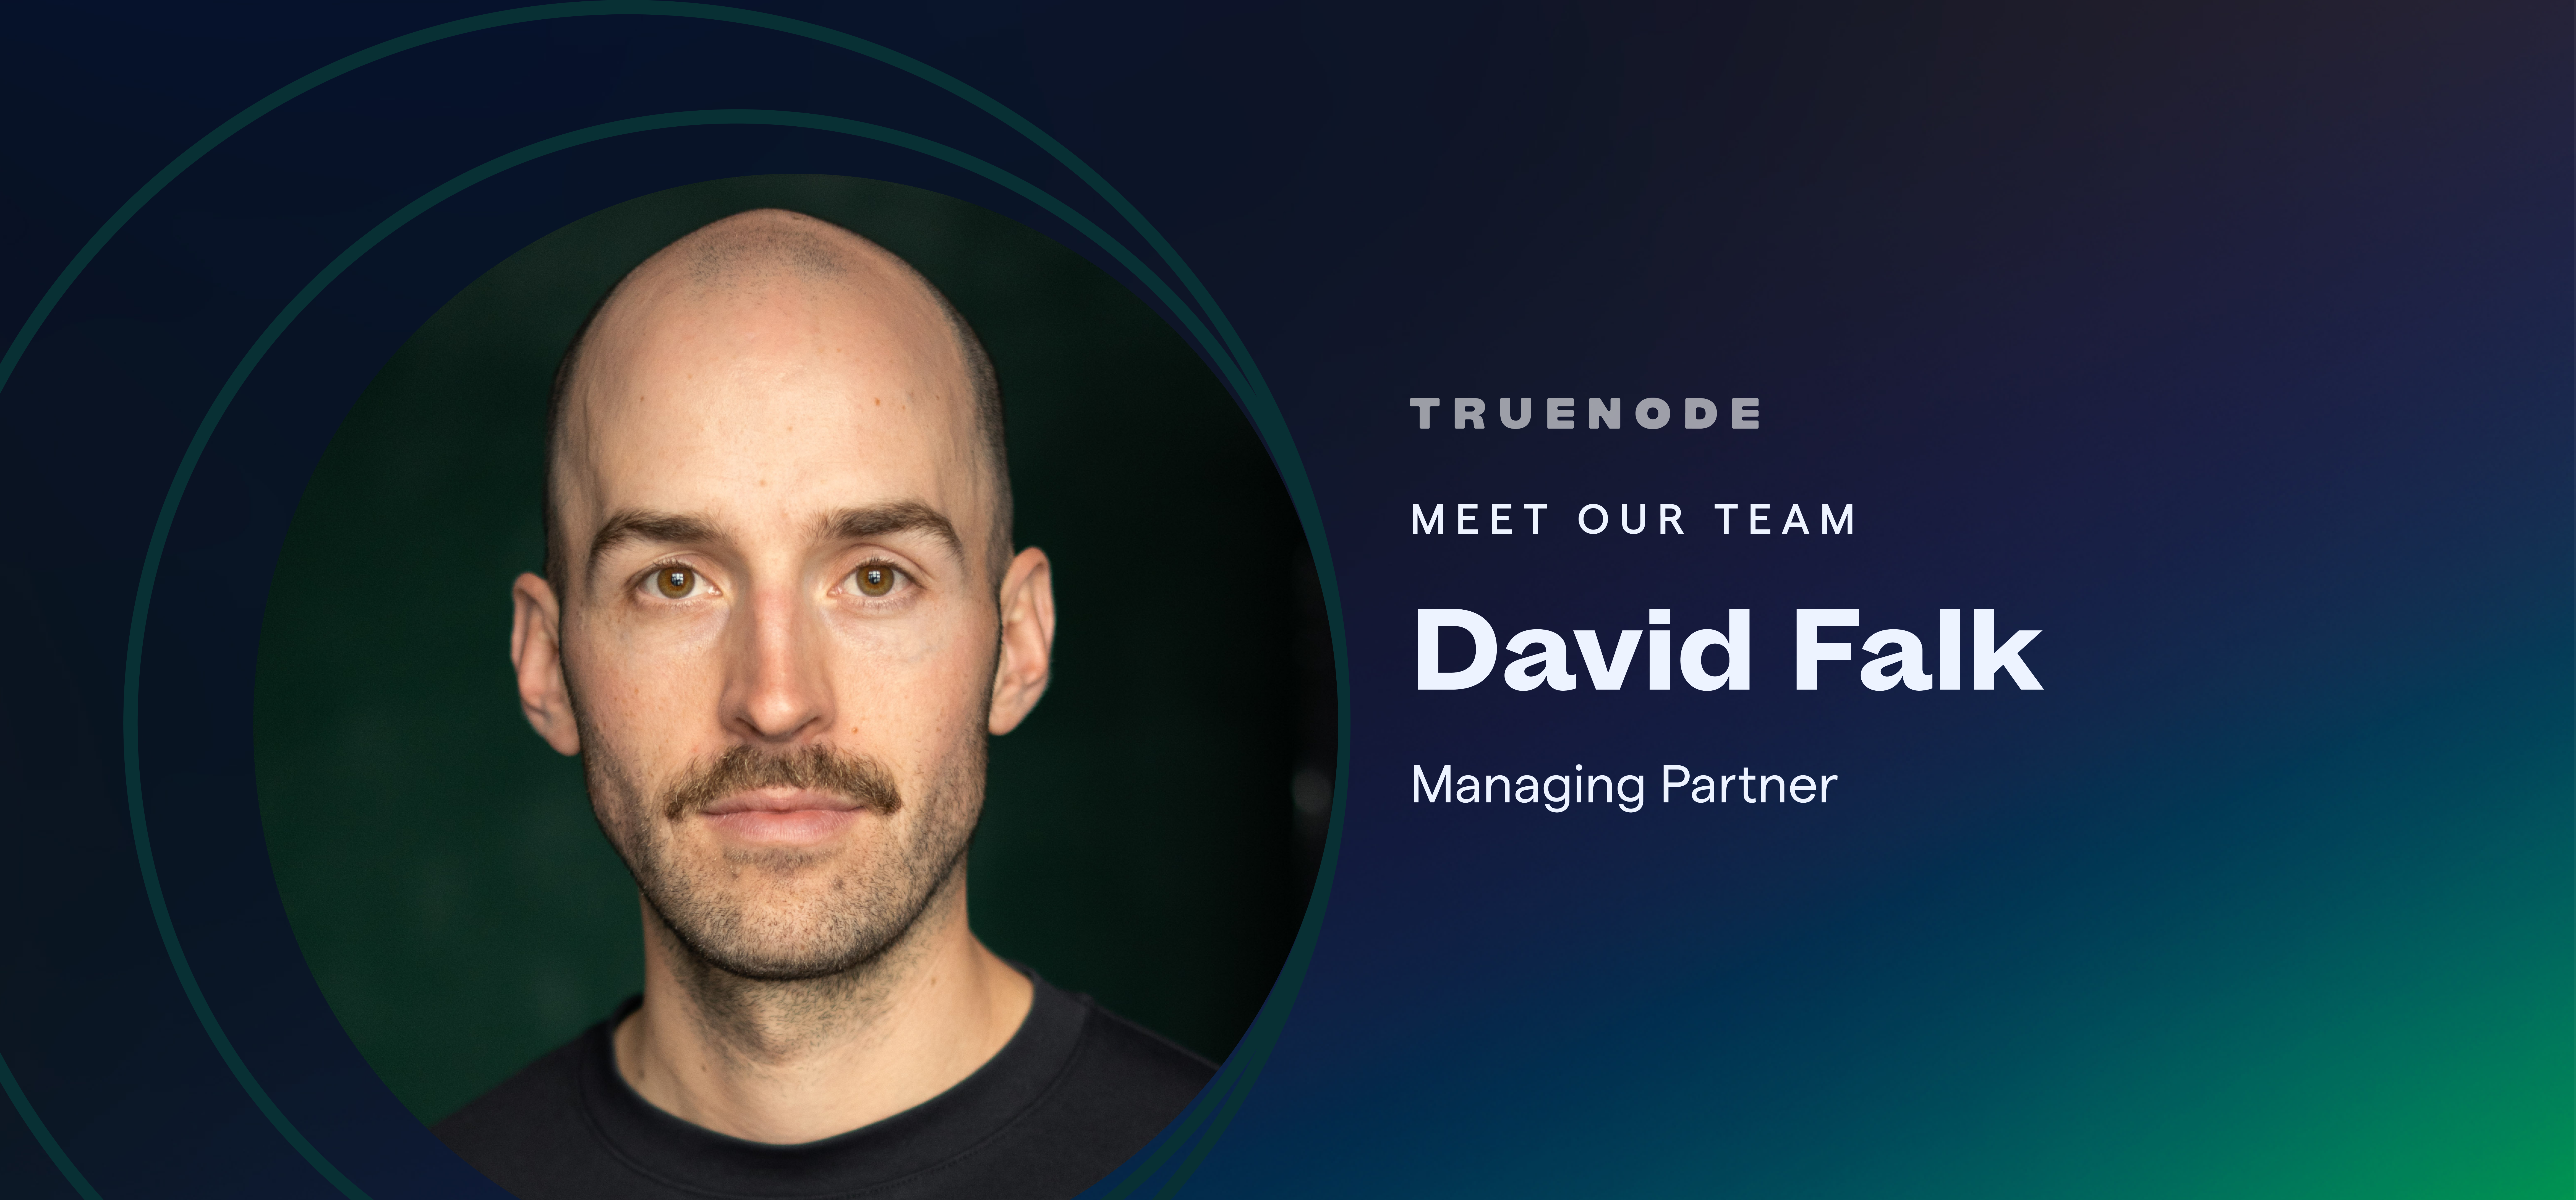 About meaningful connections and innovation with David Falk, Managing Partner at TrueNode